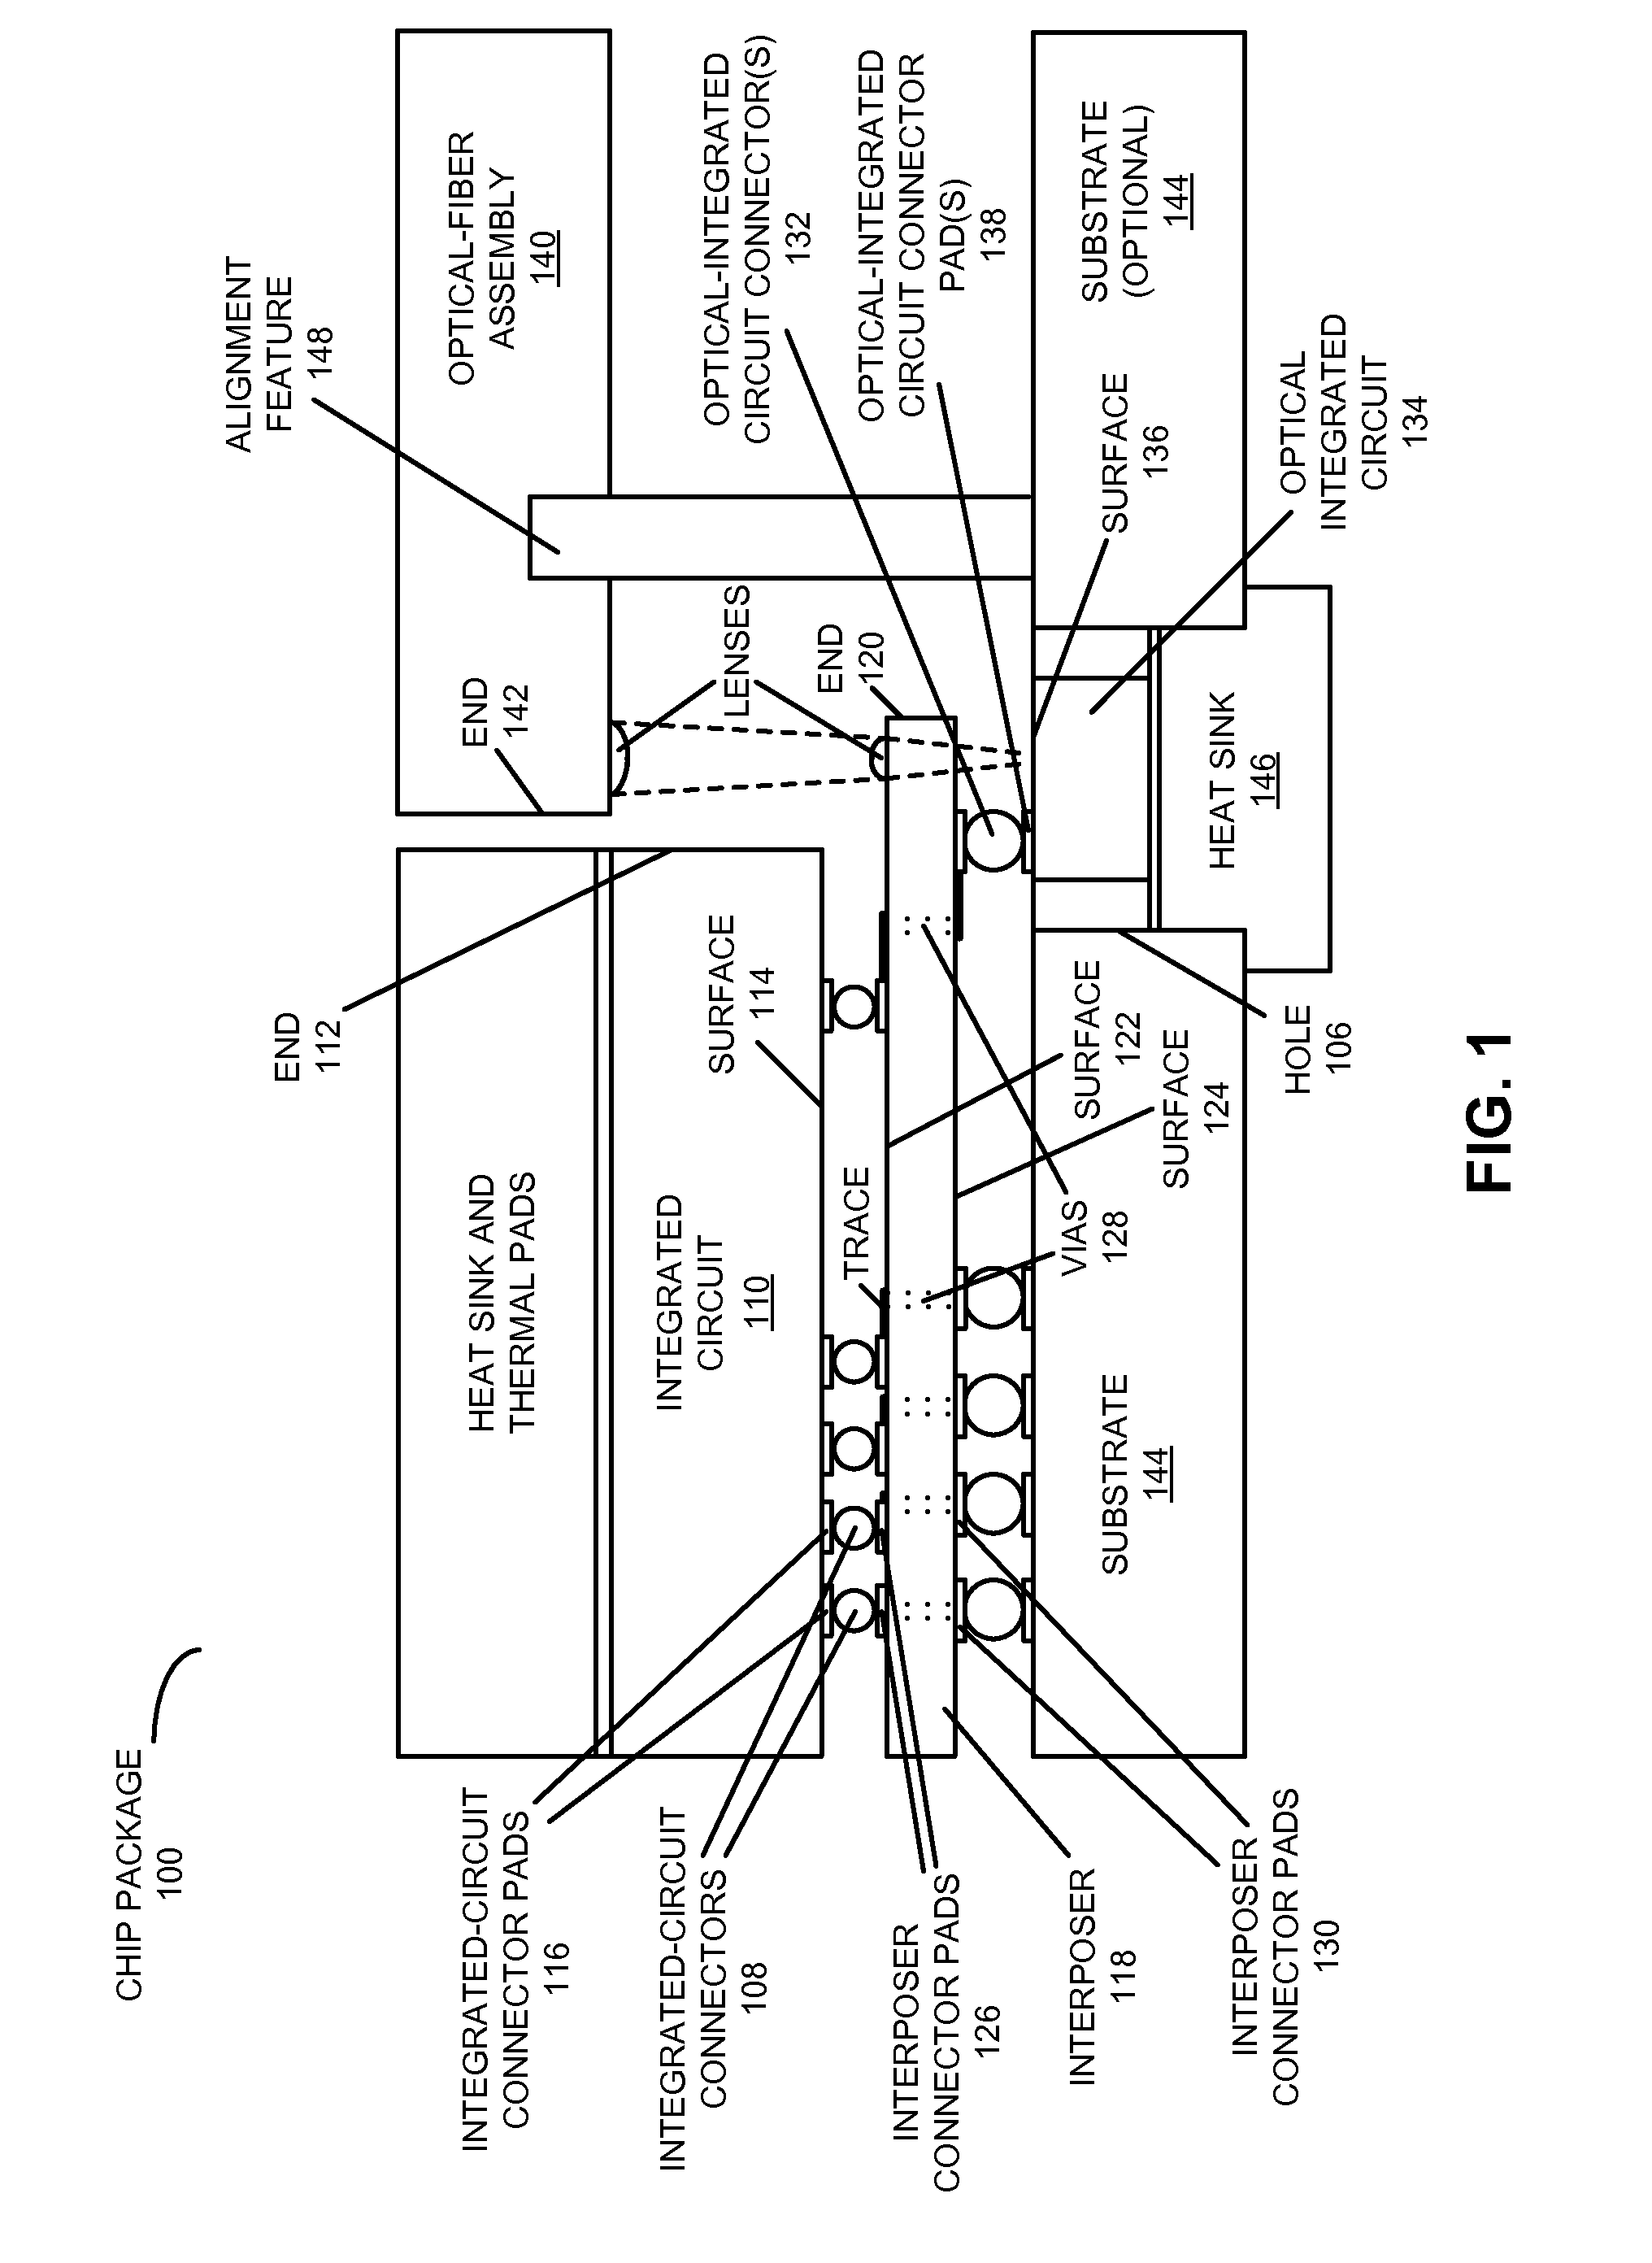 Integrated chip package with optical interface